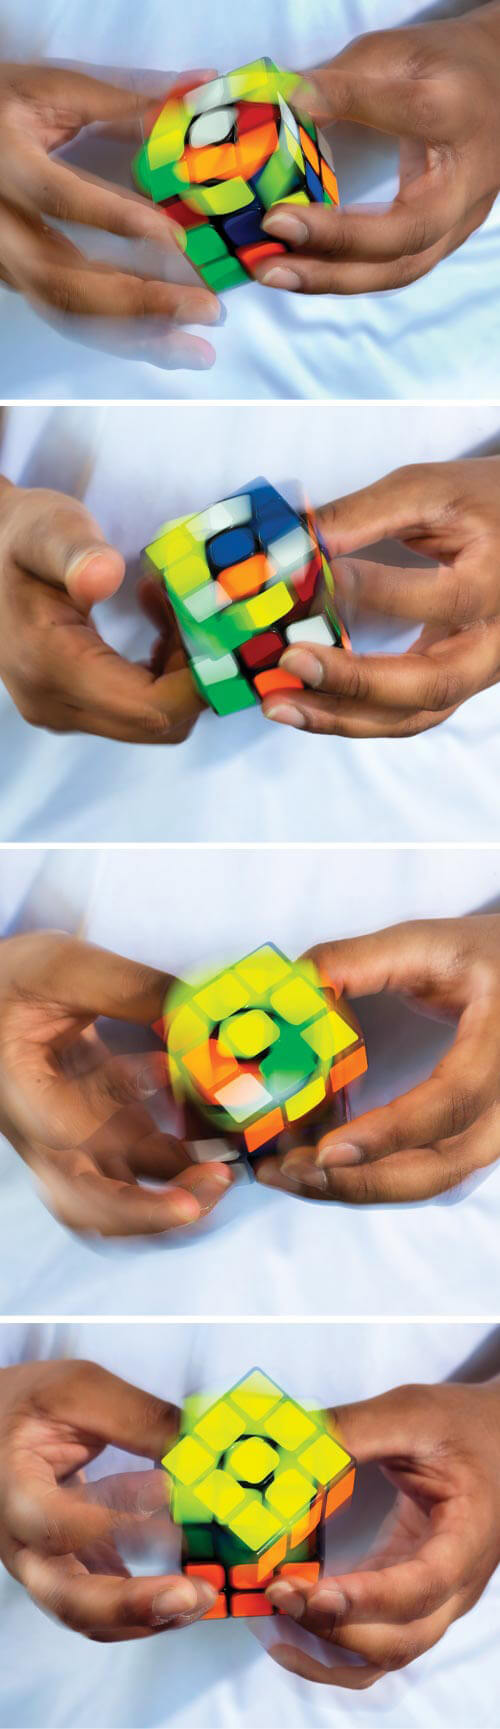 Series of photos of hands solving a Rubik's Cube